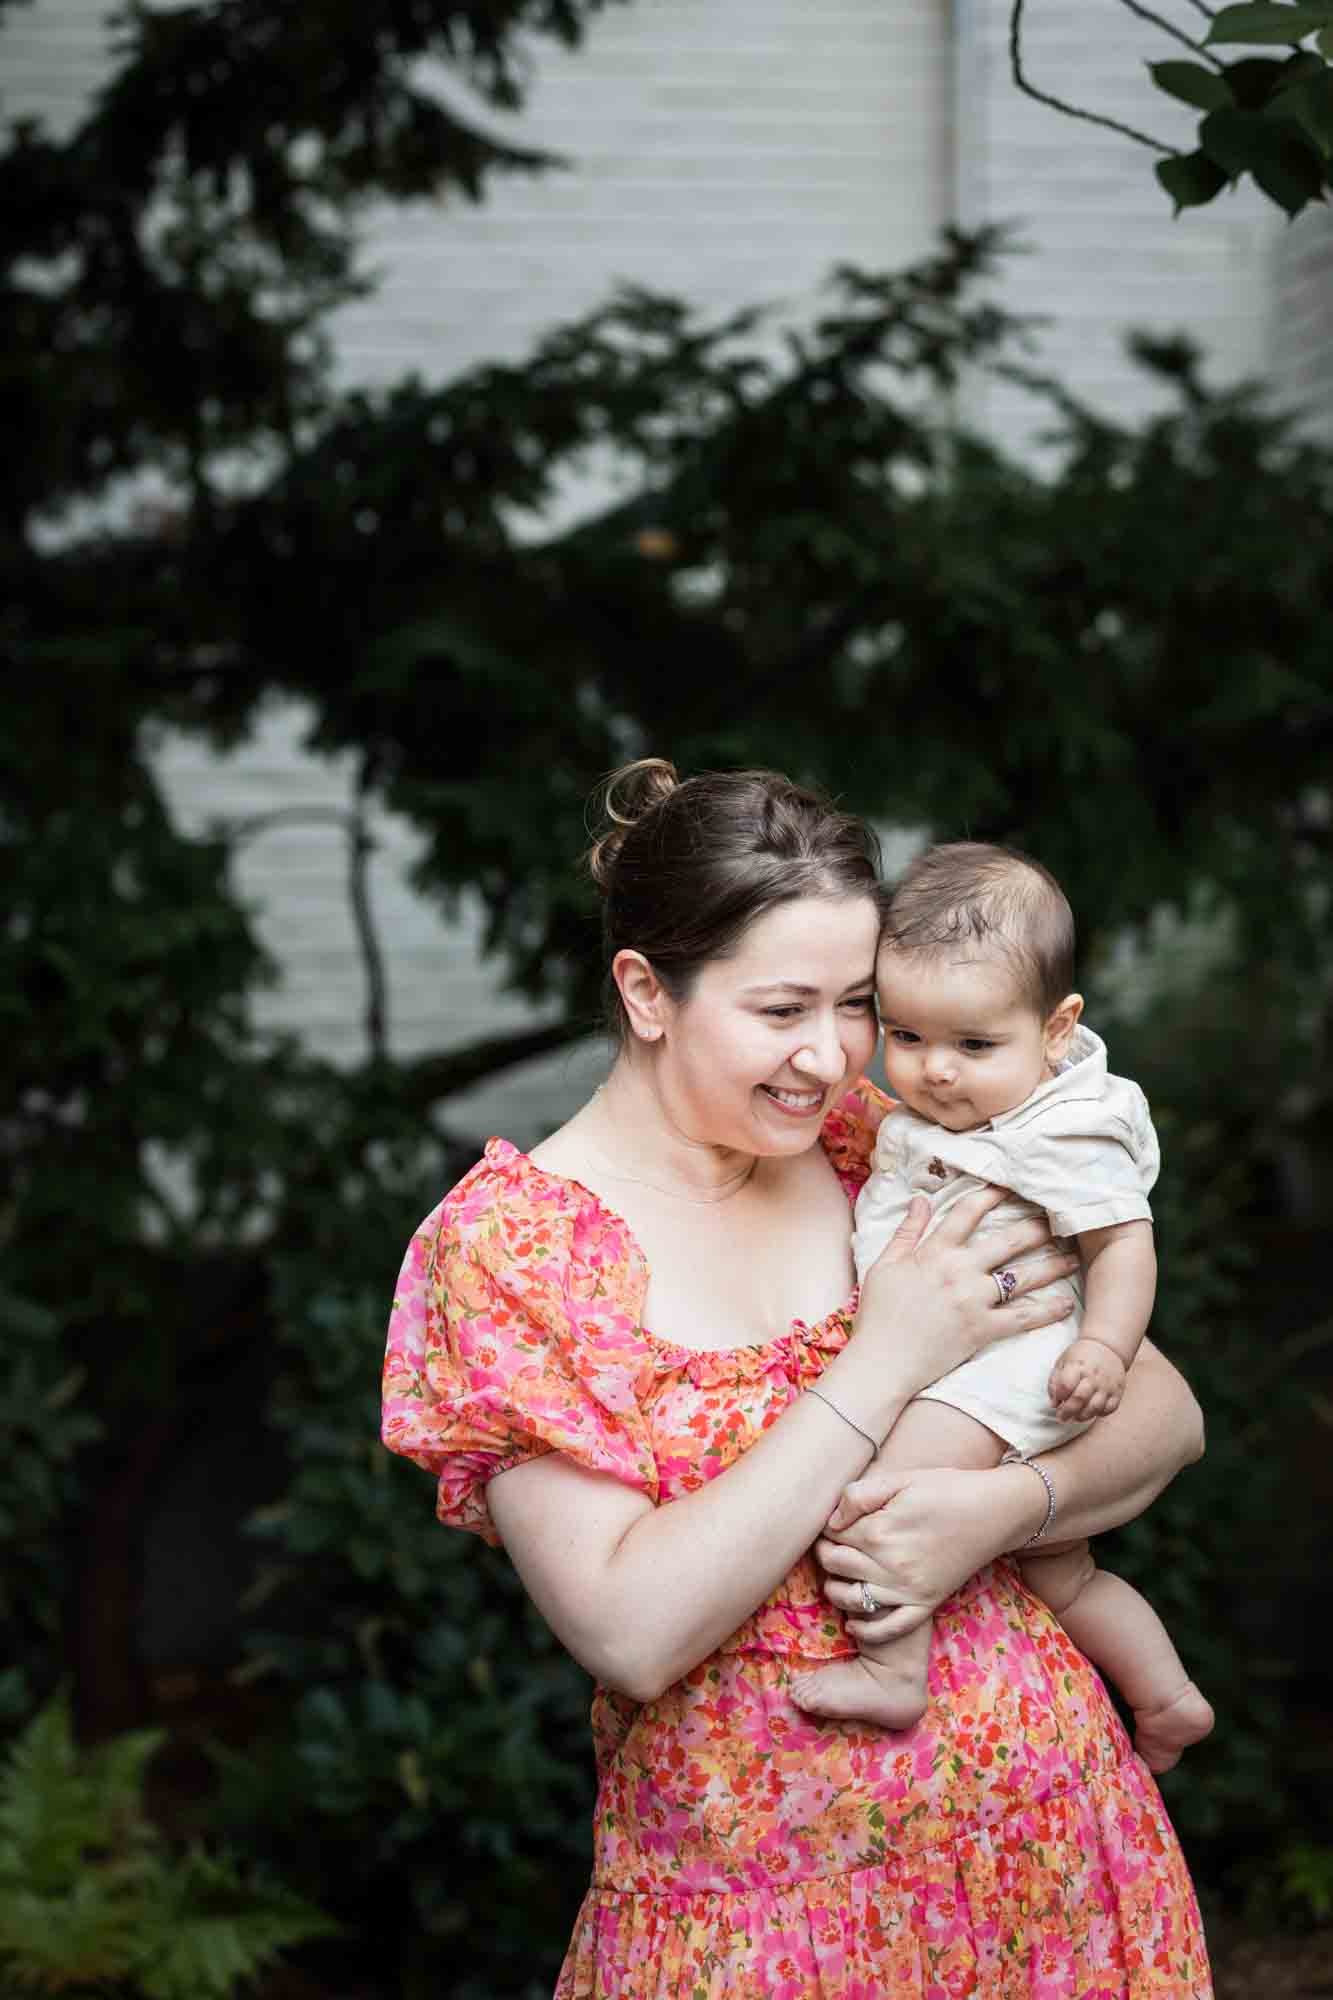 Mother in red floral dress holding baby boy during a Brooklyn Commons family portrait session